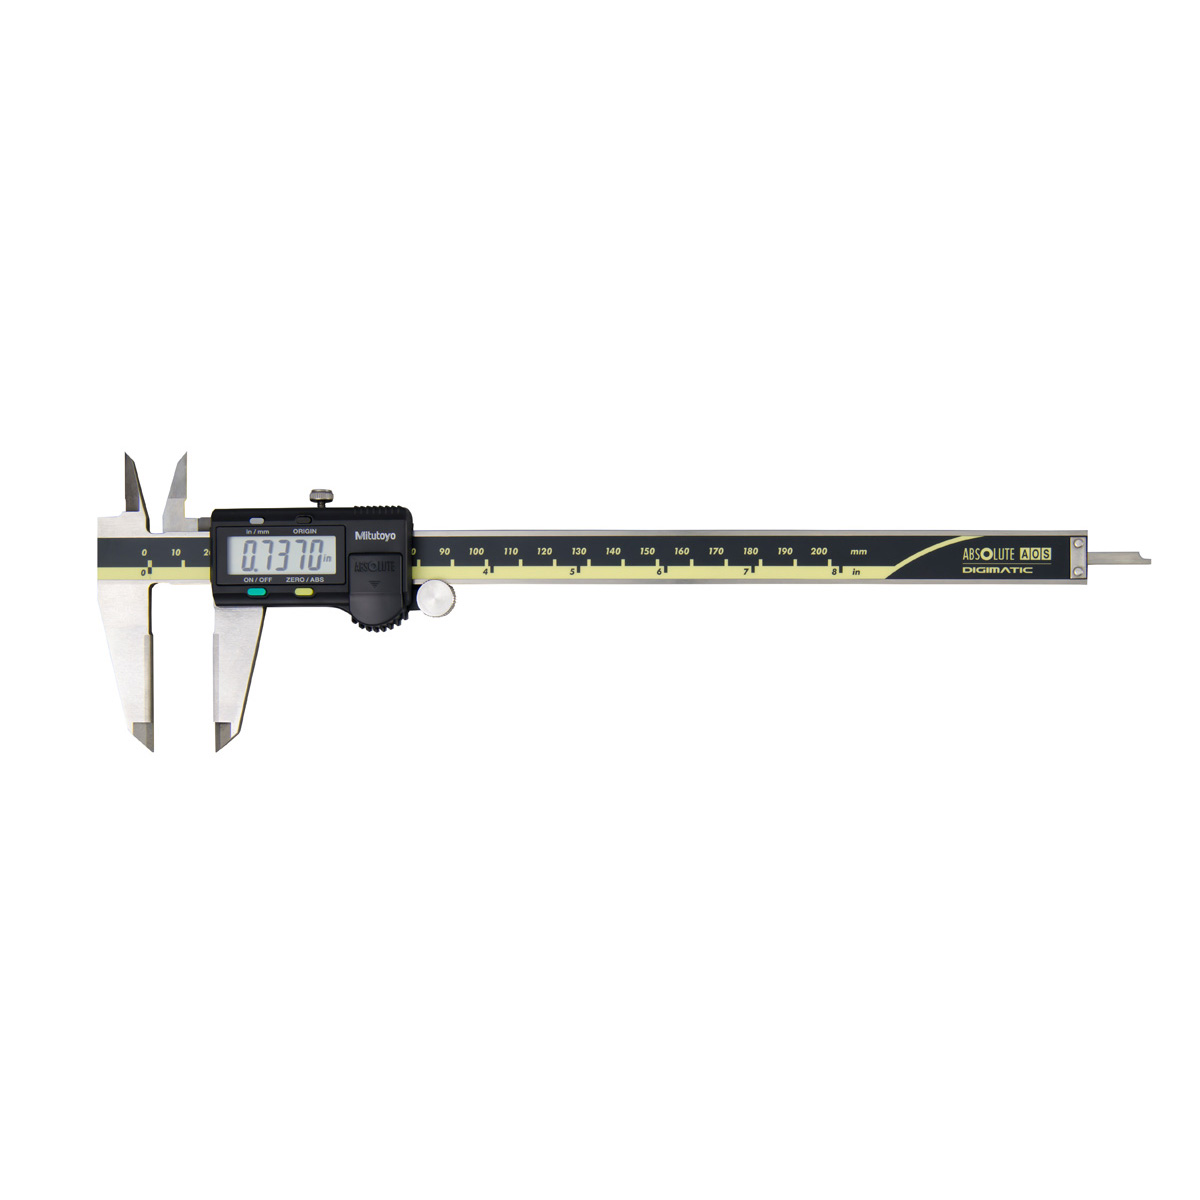 Picture of Mitutoyo 500-164-30 0-8 in. Digimatic AOS Absolute Caliper with Indoor & Outdoor Jaws